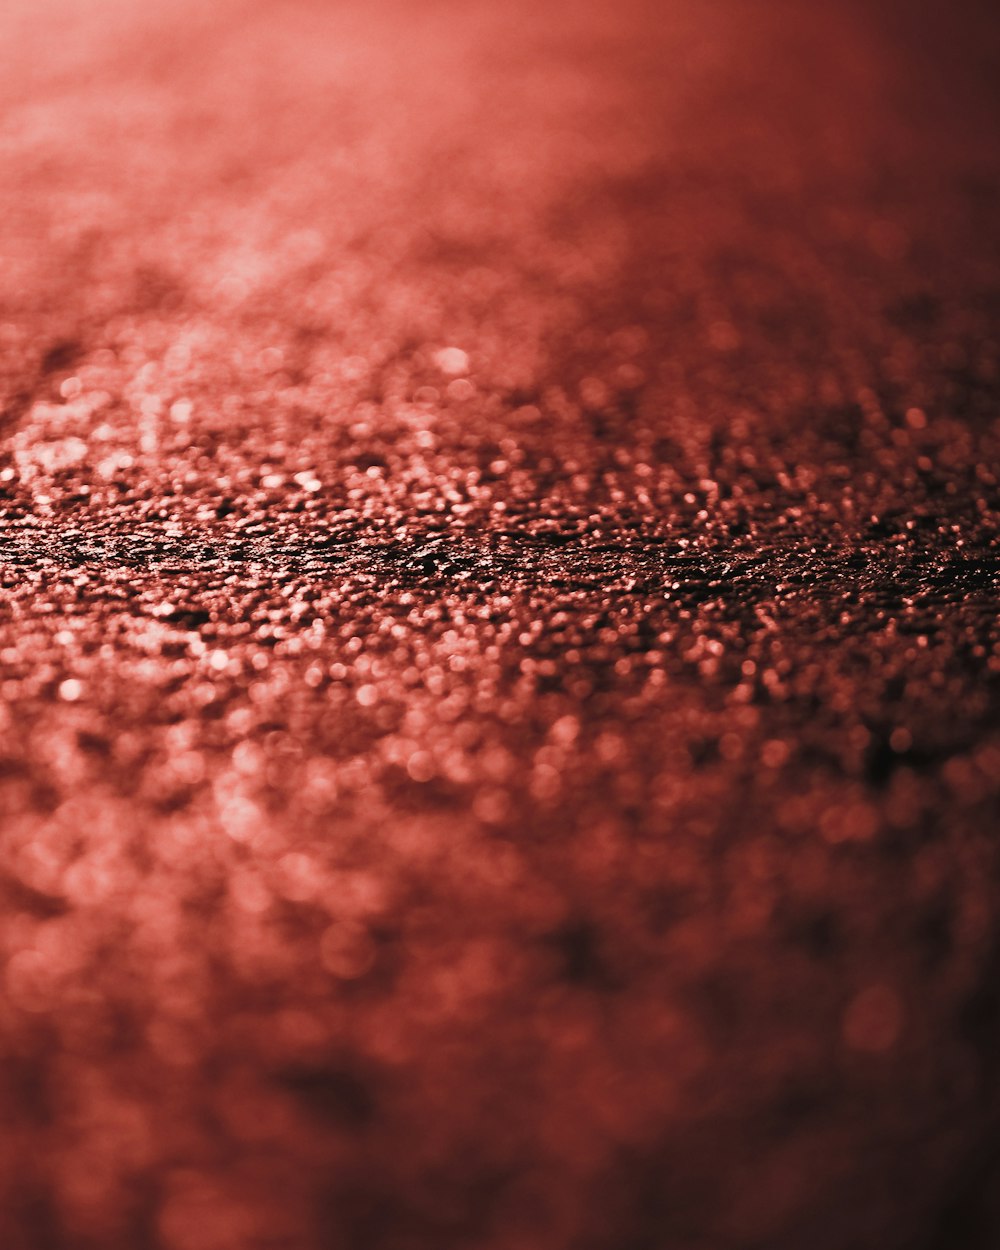 a close up of a red surface with a blurry background